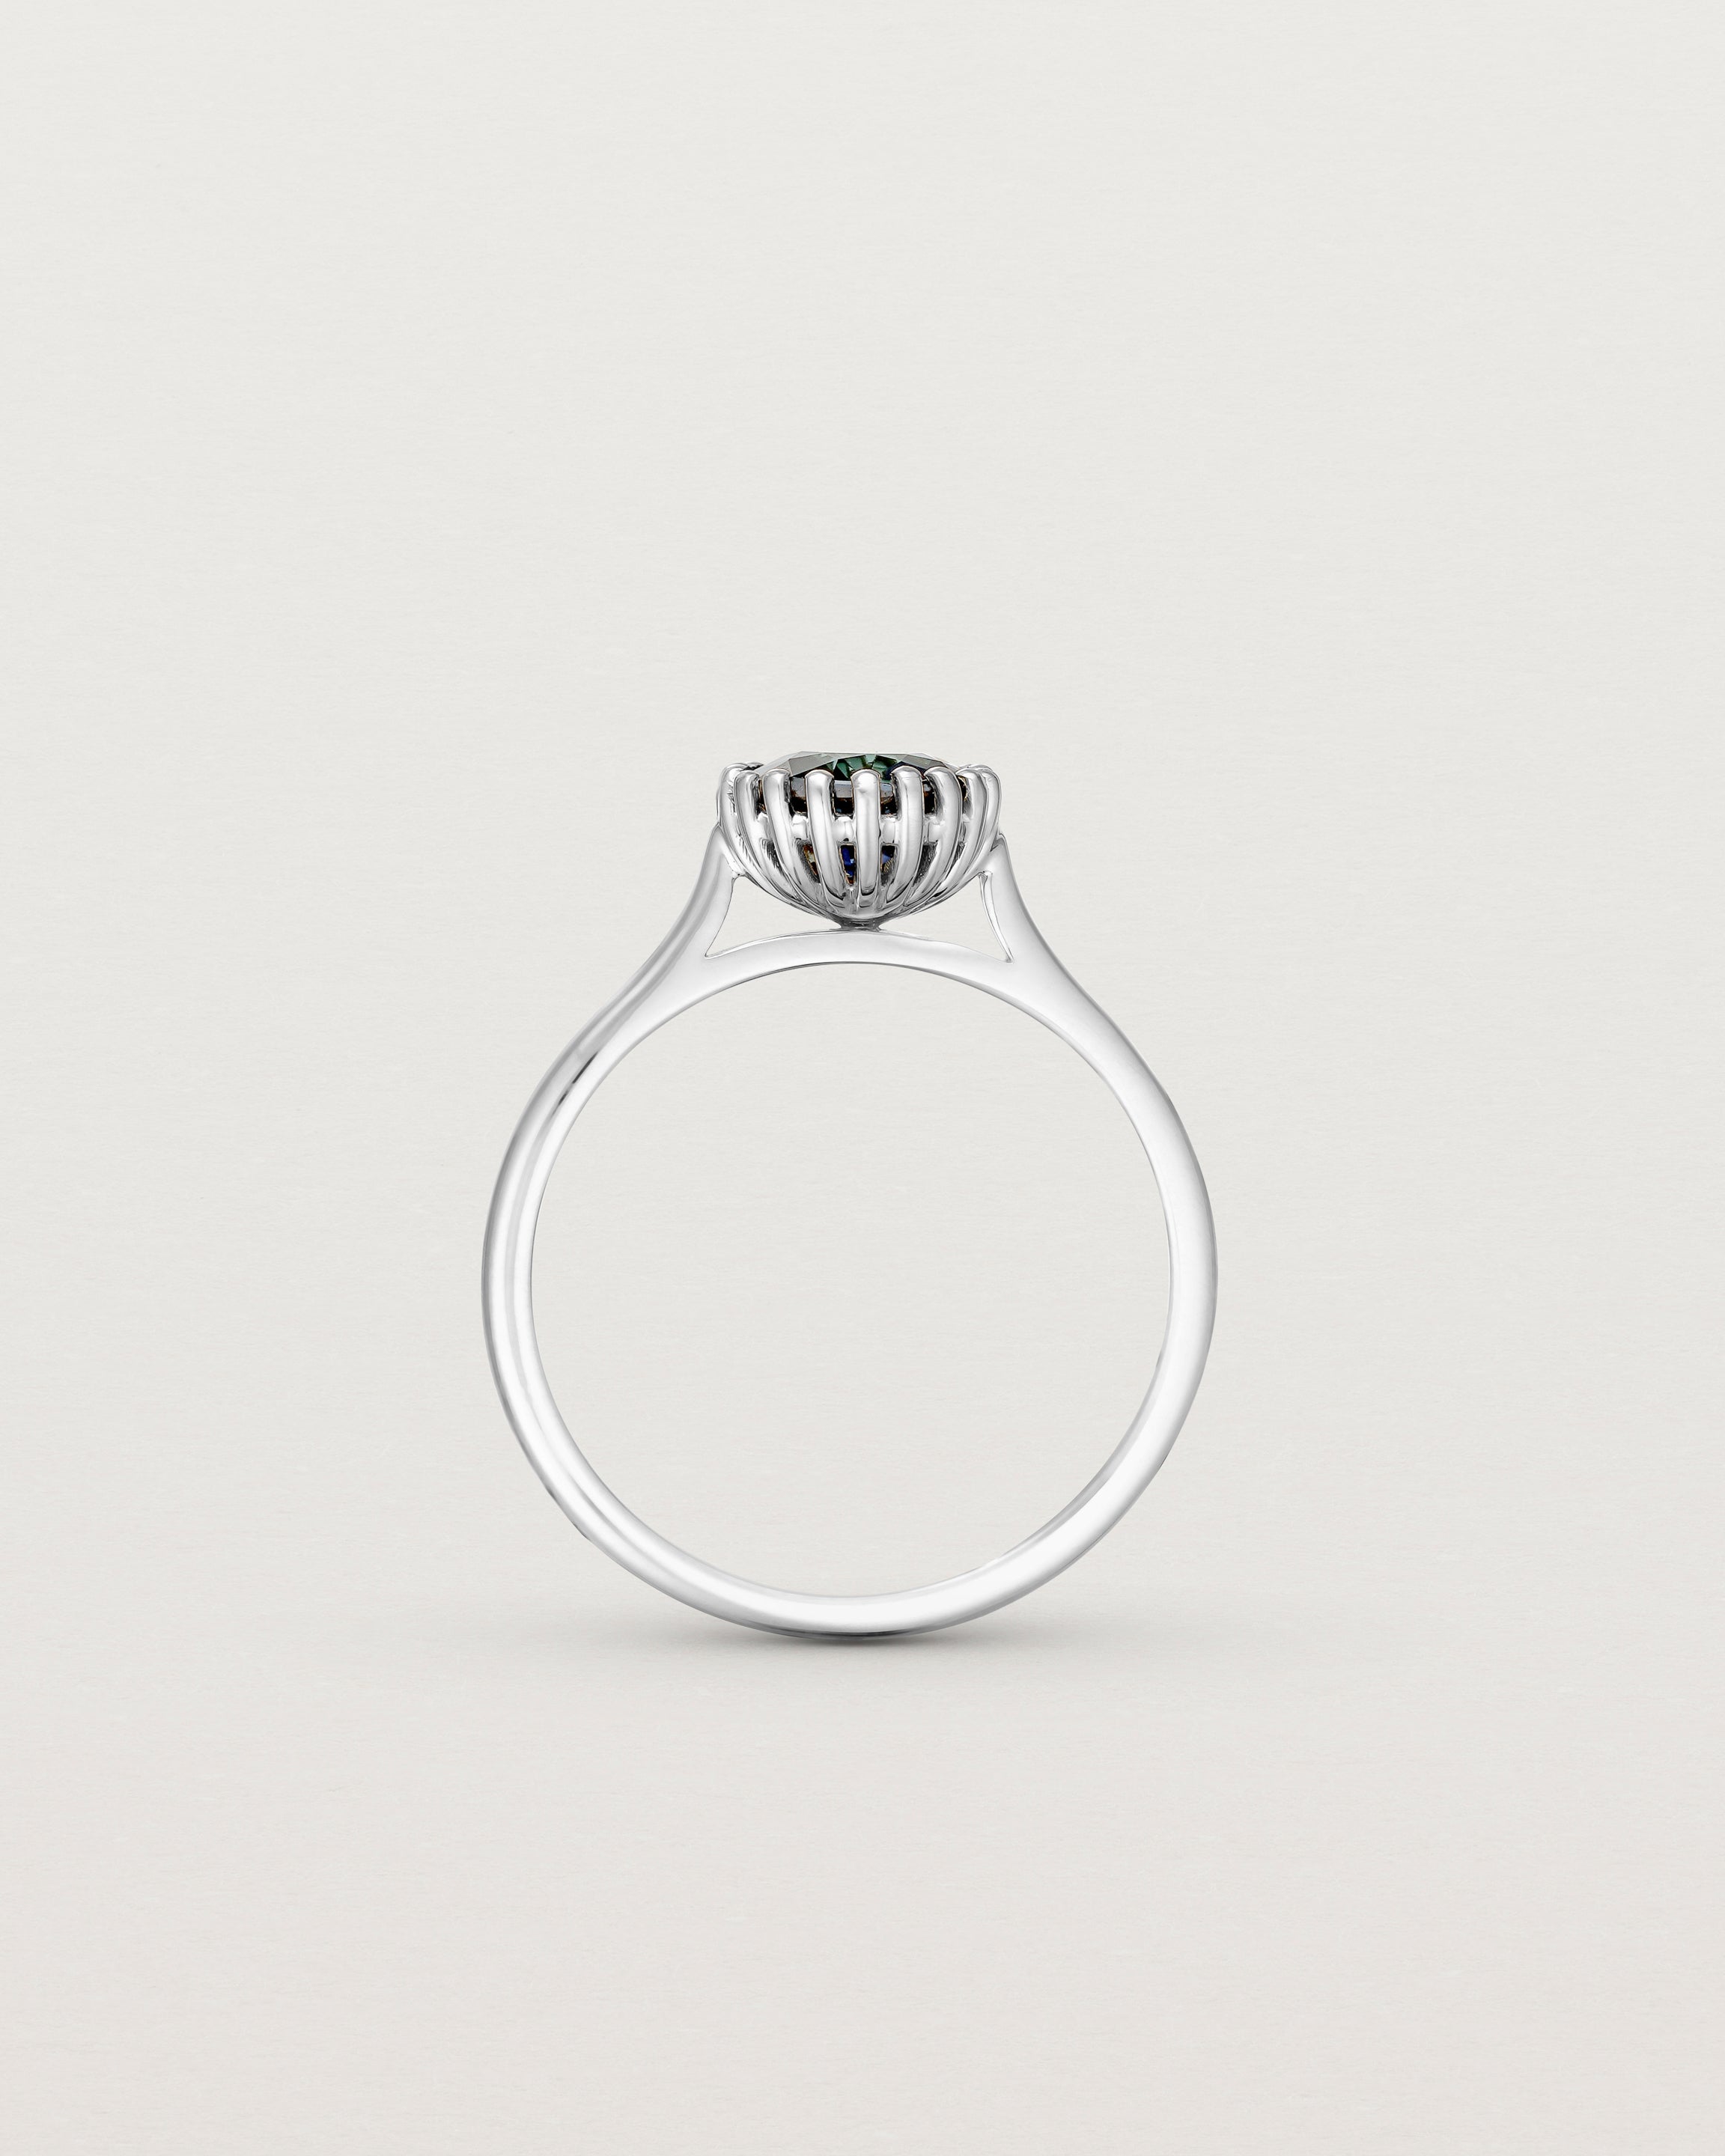 Standing view of the Meroë Round Solitaire | Australian Sapphire in white gold.